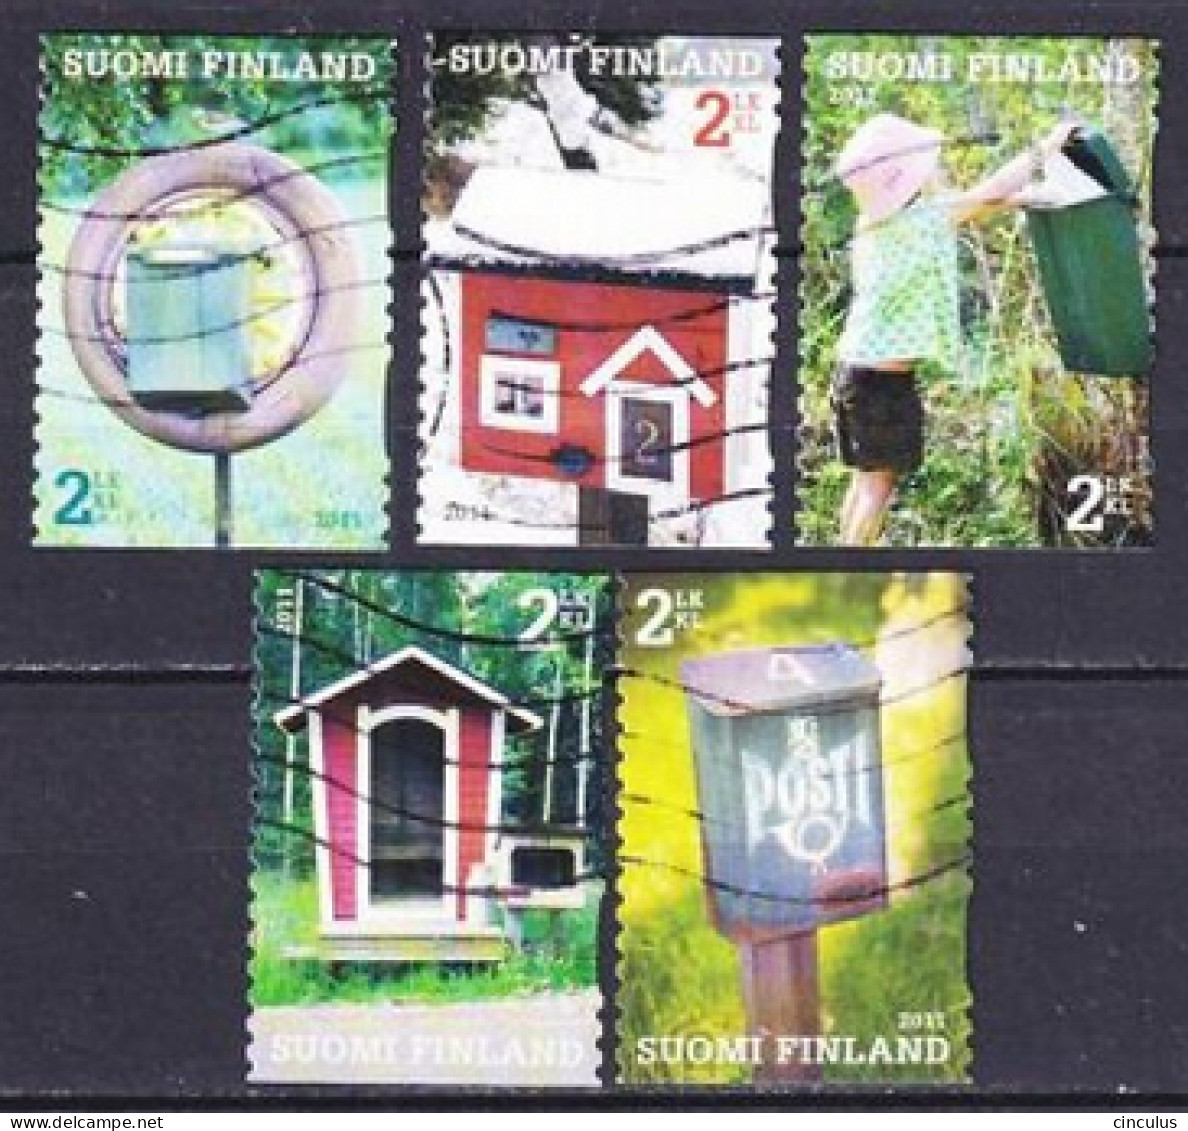 2011. Finland. Mail Boxes. Used. Mi. Nr. 2080-84 - Used Stamps